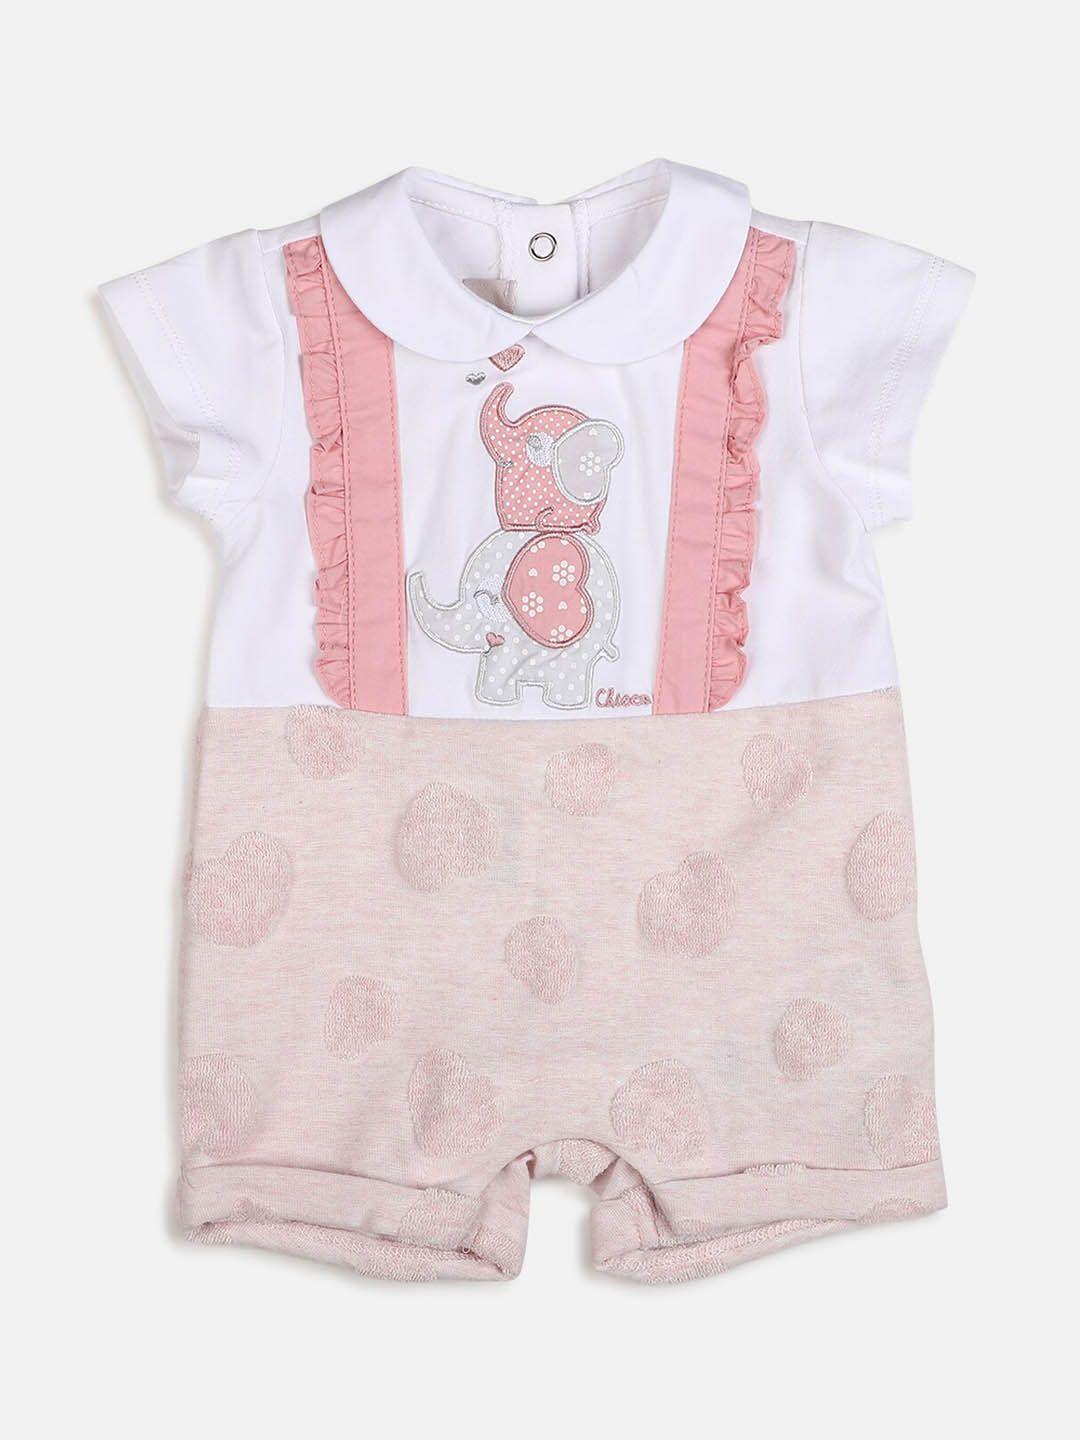 Chicco Infants Girls Self Designed & Embroidered Pure Cotton Romper